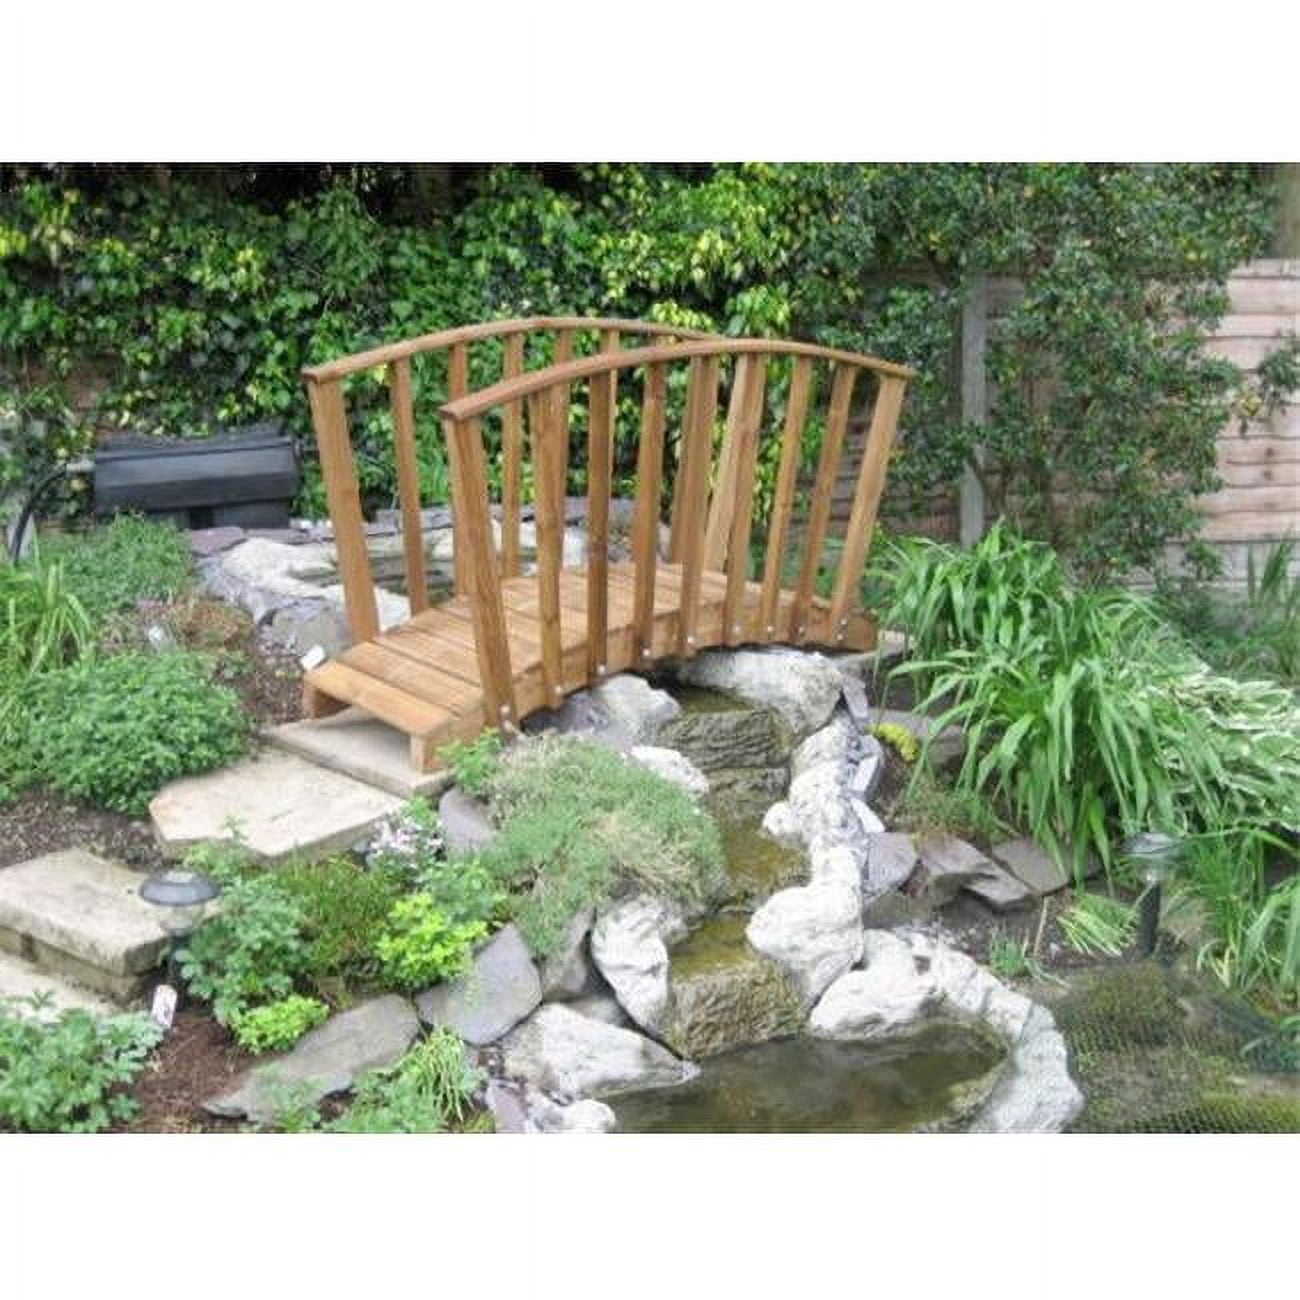 10 Ft. Monets Red Cedar Bridge With Curved Wisteria Canopy